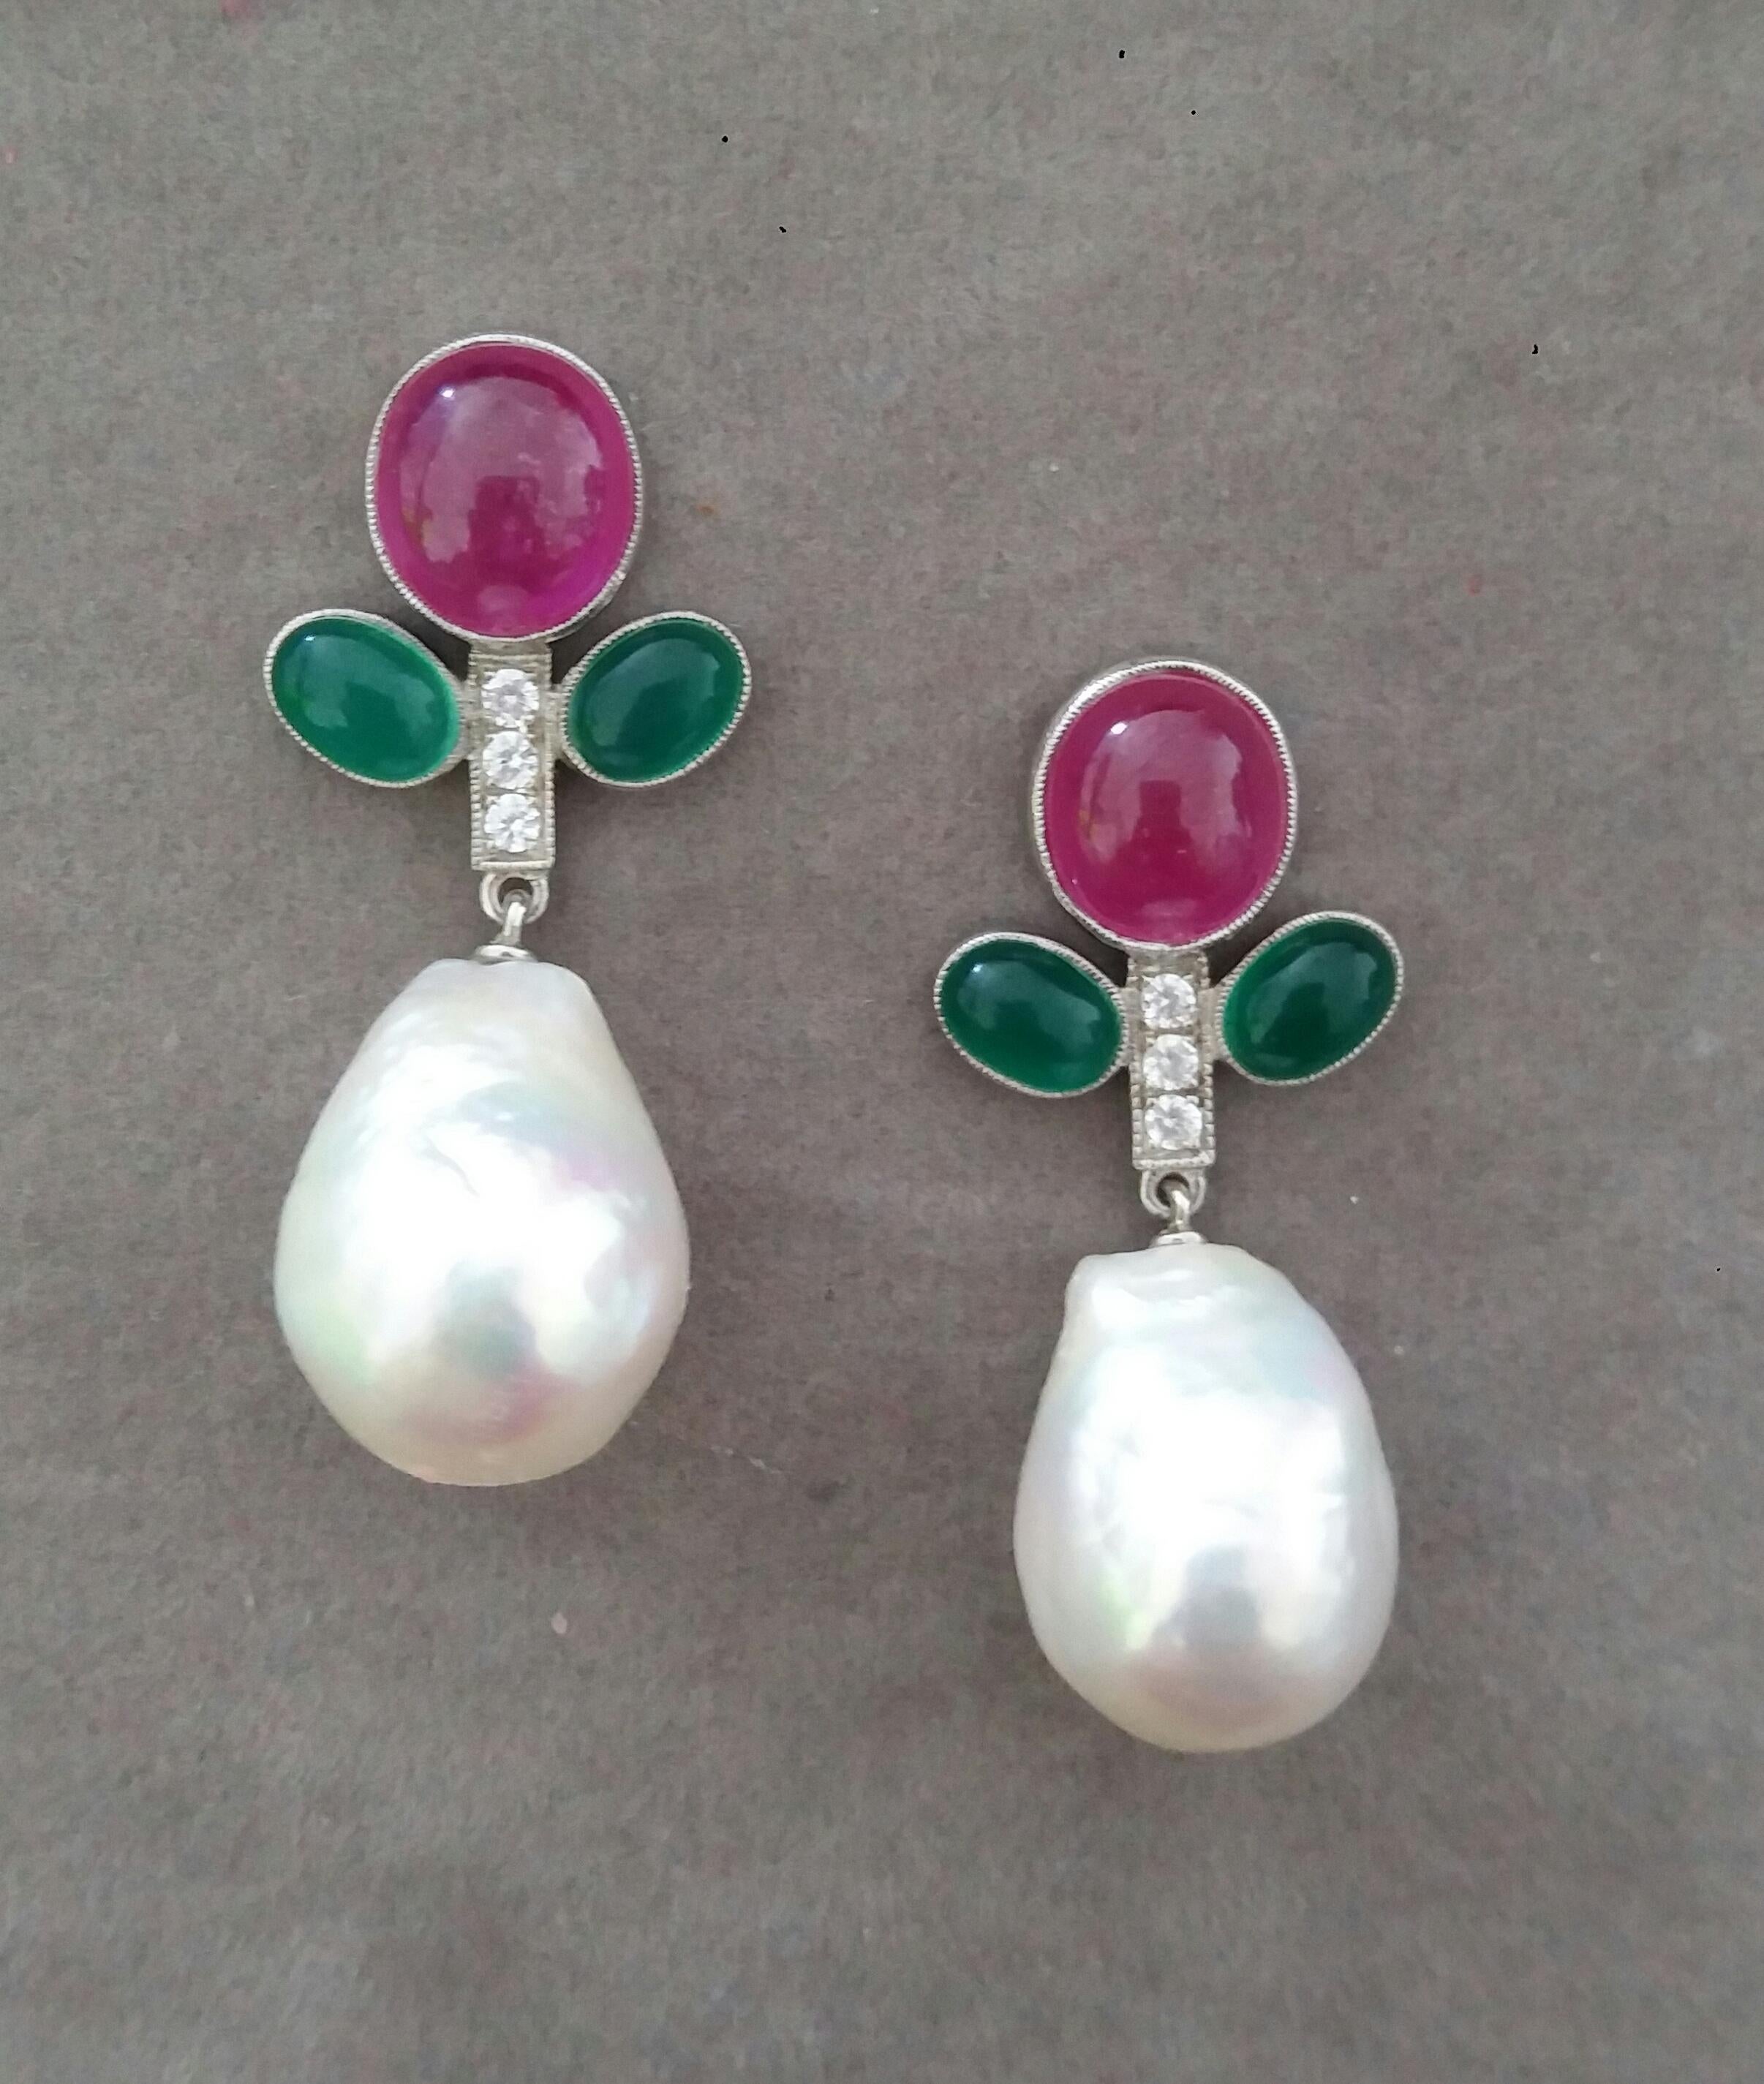 In these classic Tutti Frutti Style earrings the tops are 2 White Gold Branches, 6 round full cut diamonds weighing 0,18 carats,and 2 pairs of  oval Green Onyx cabs measuring 5x7 mm. and 1 pair of oval Ruby cab measuring 8x10 mm ,in the lower parts